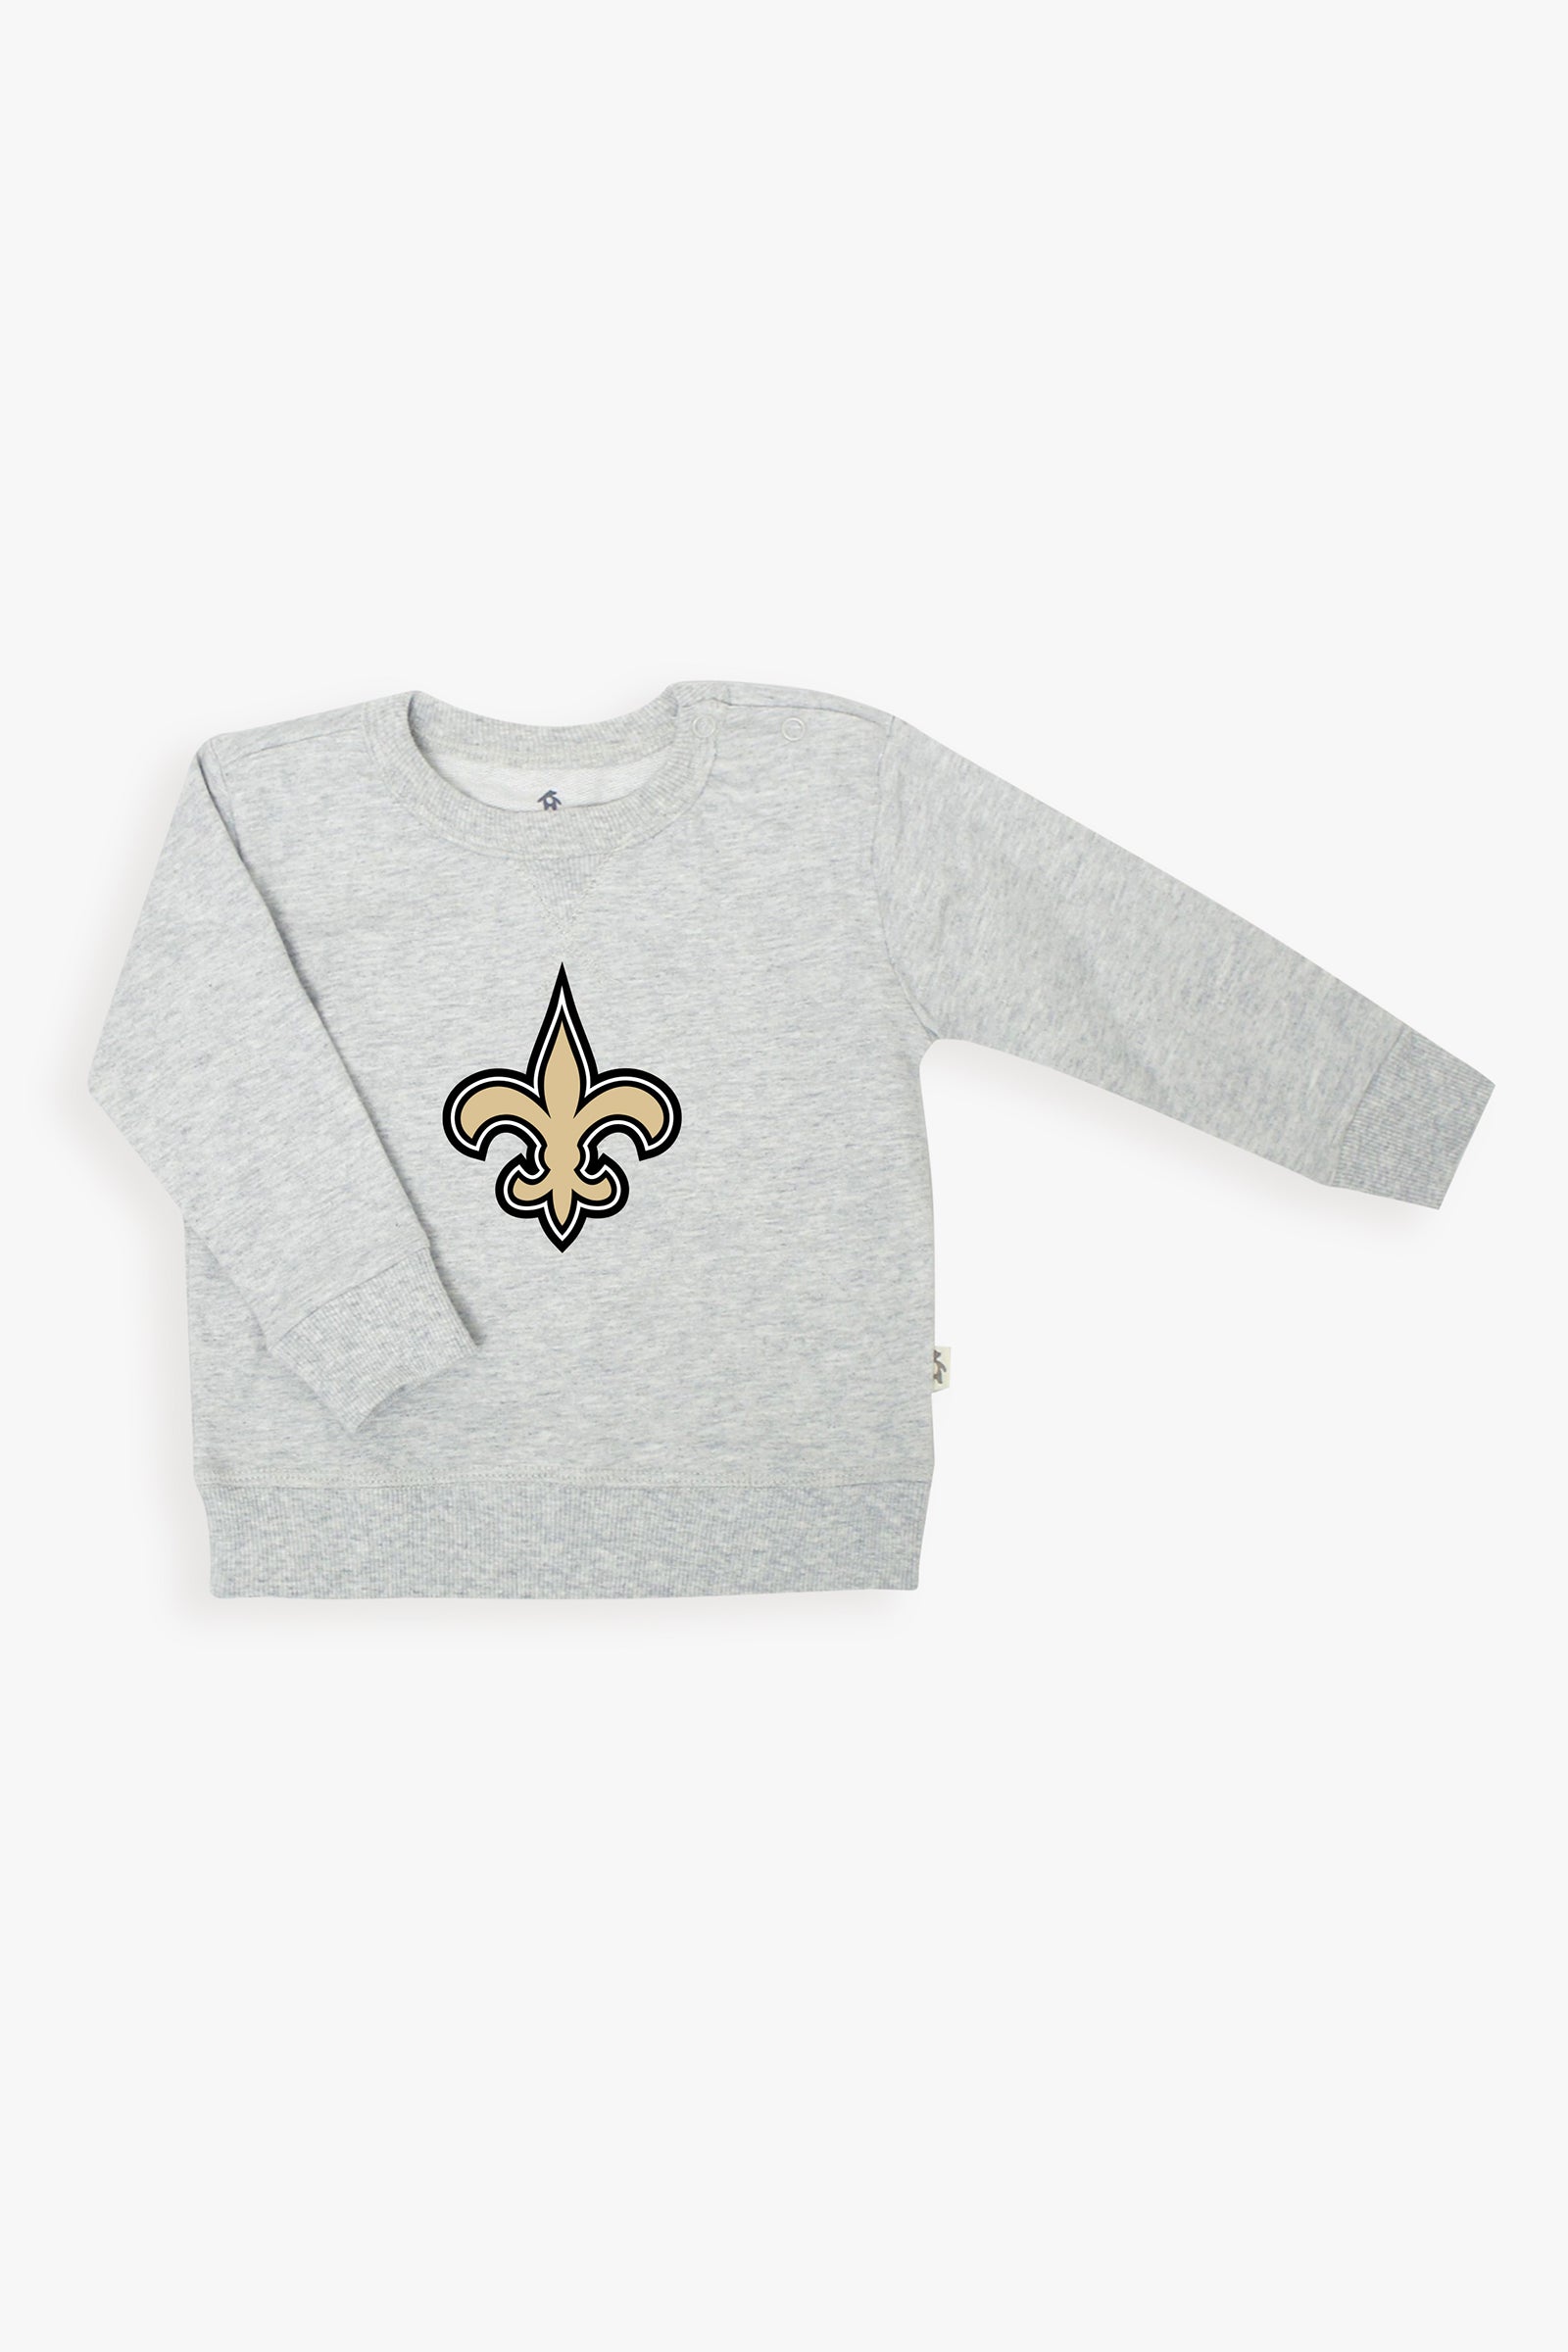 NFL Baby French Terry Crewneck Sweater in Grey